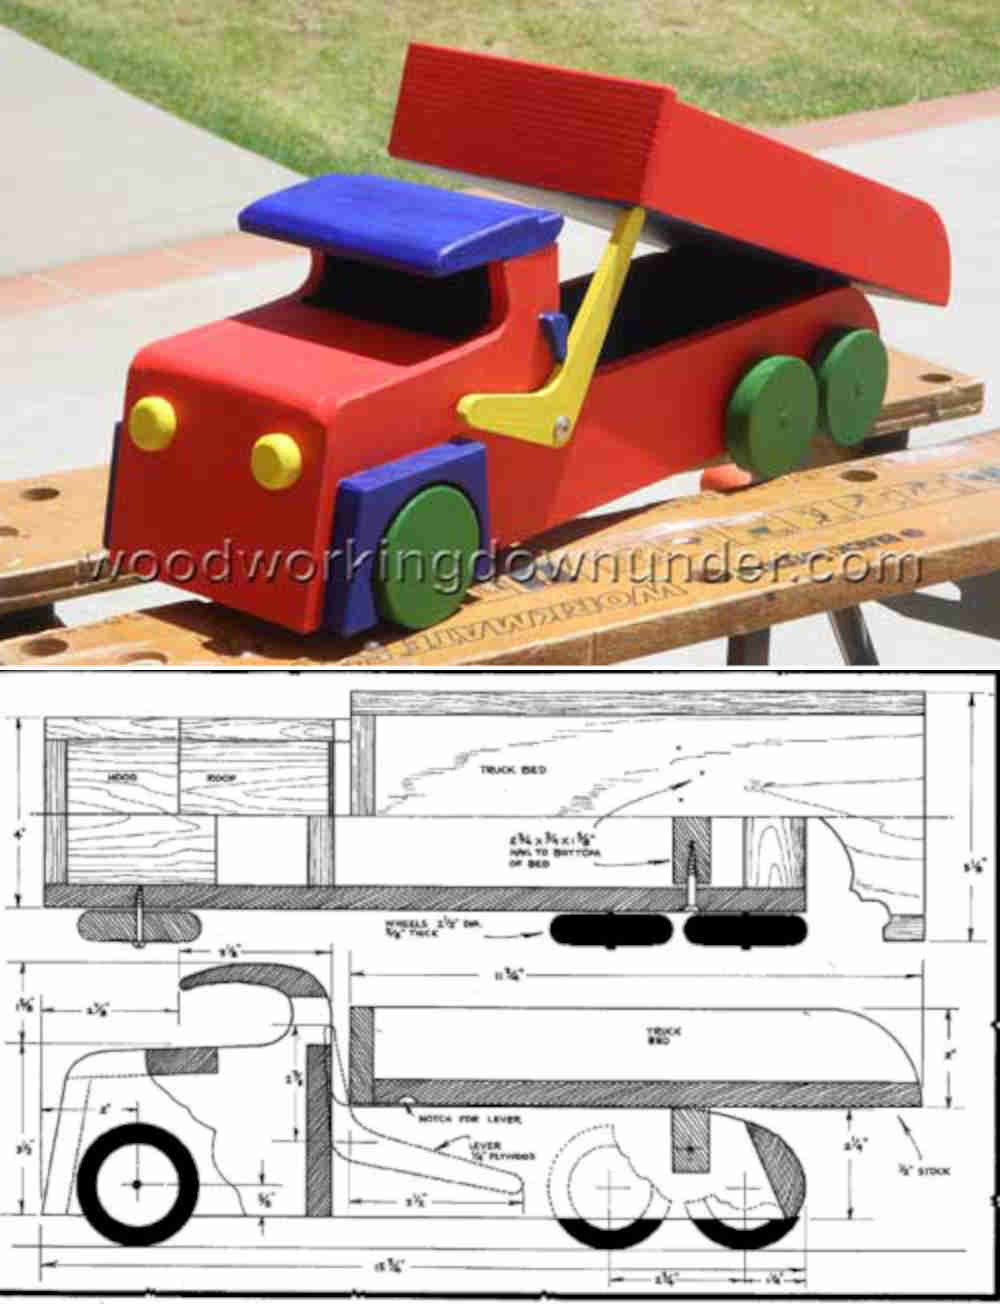 Plans and Patterns for Wood Model Truck, Car, Train, Planes and Cranes.